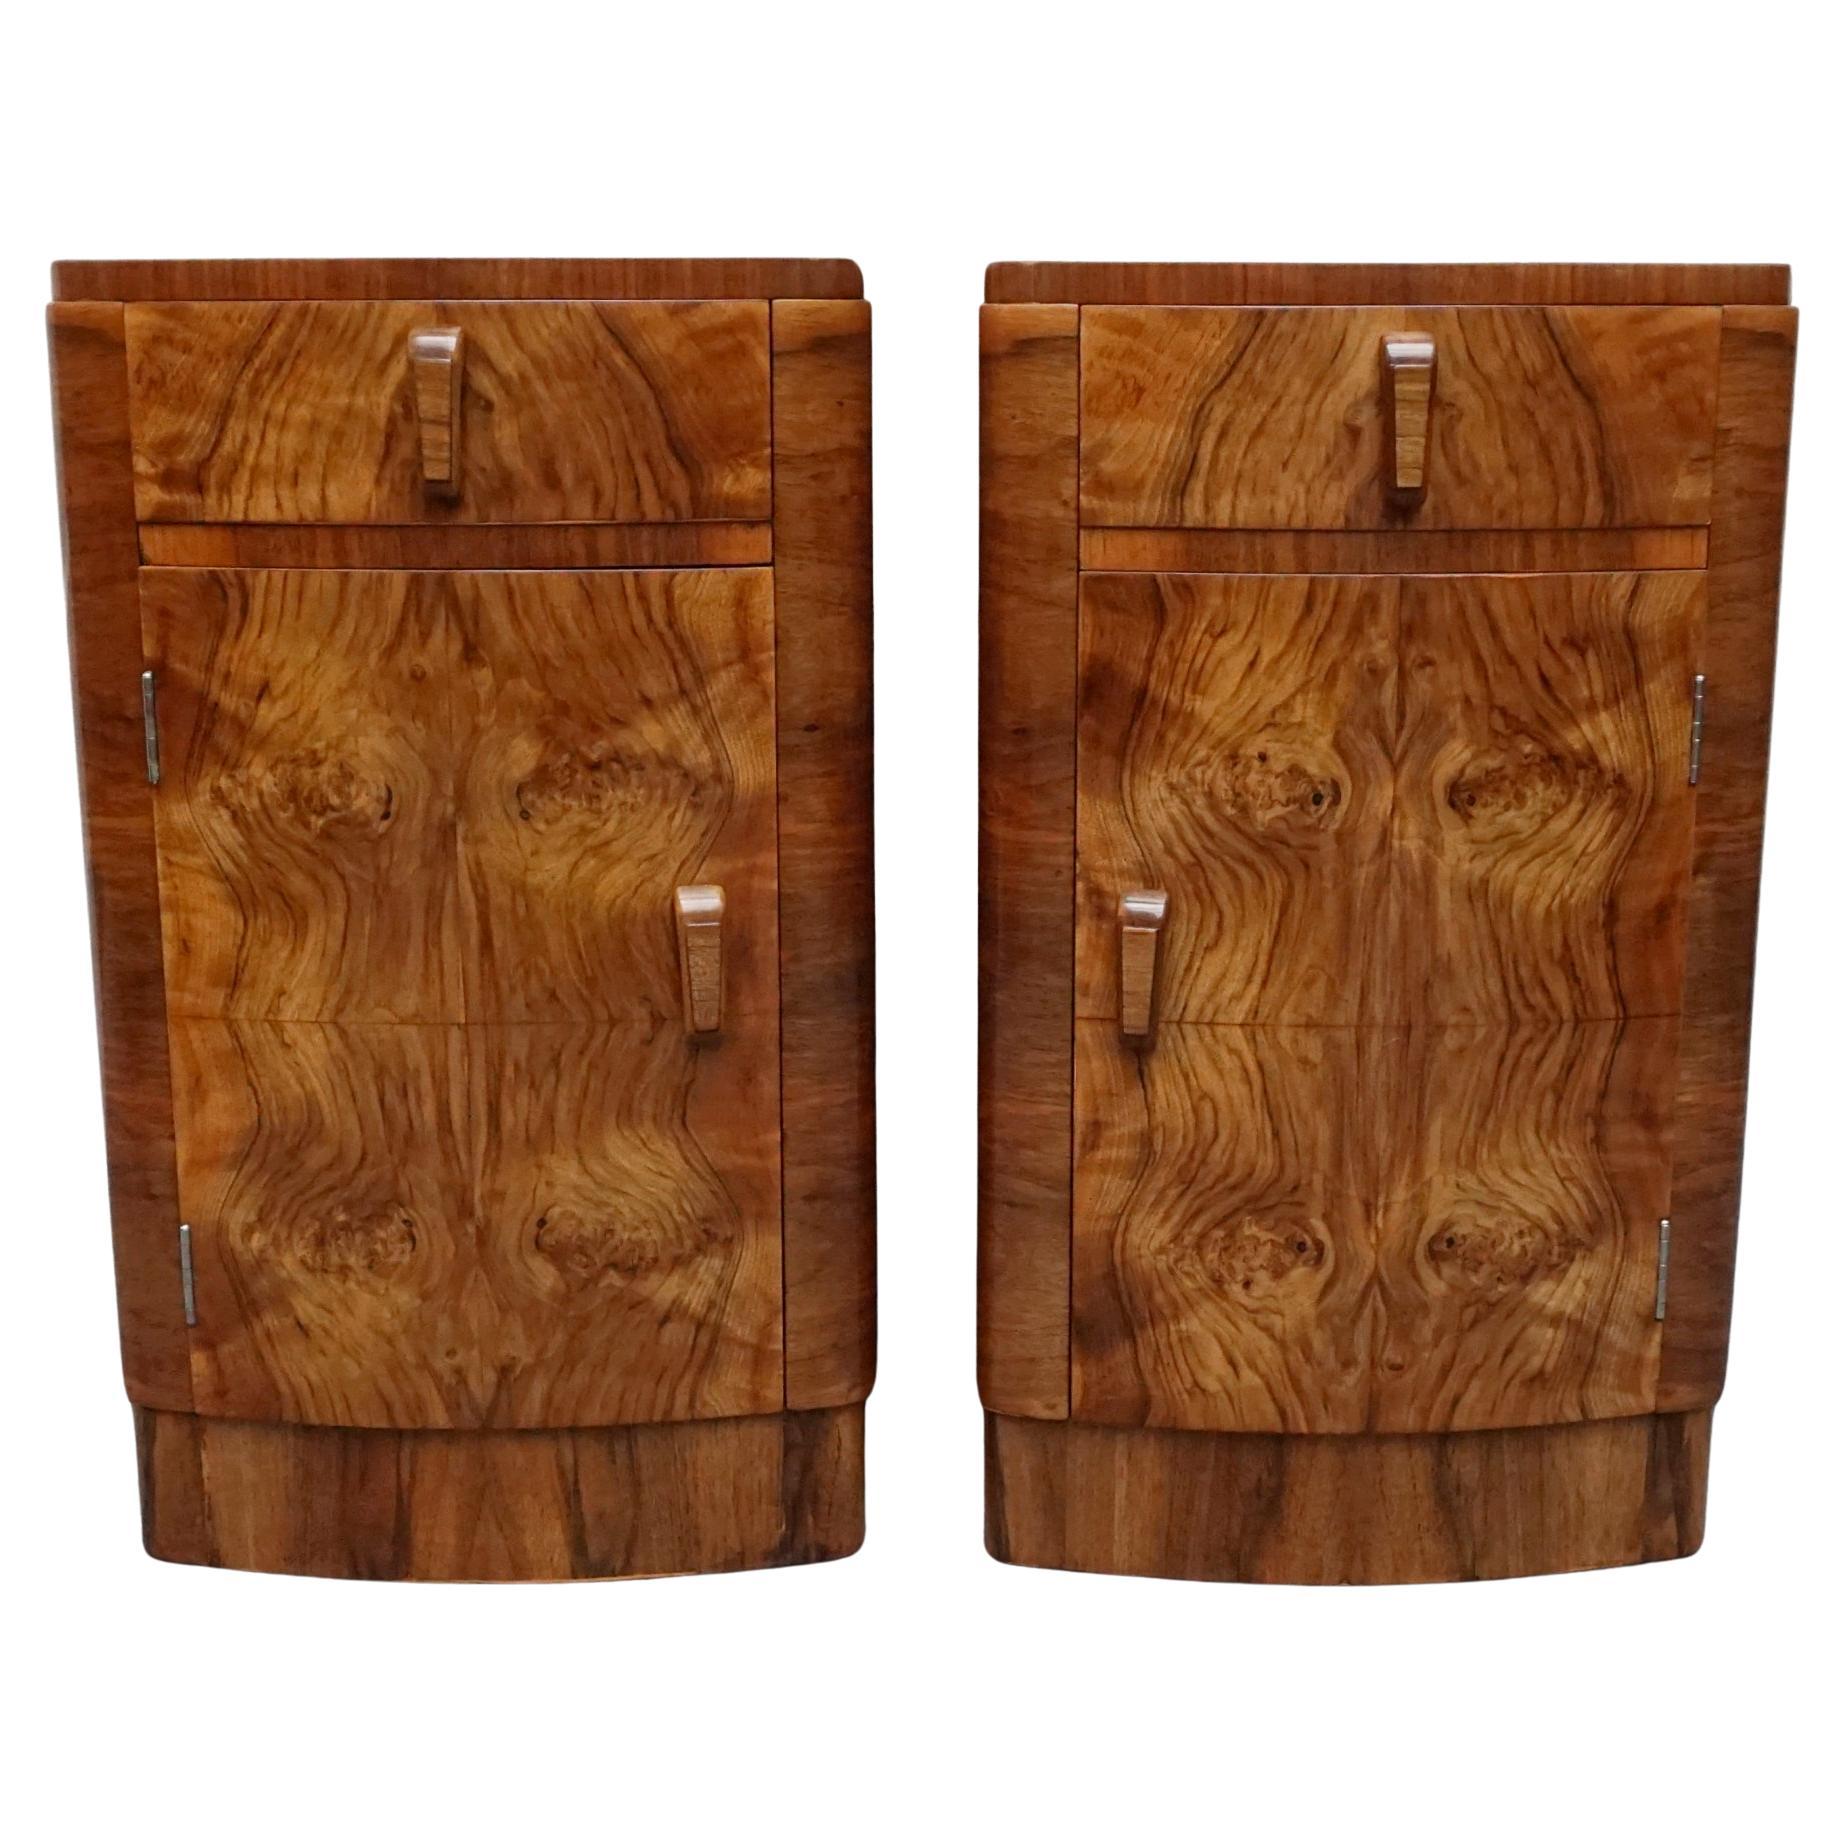 A Pair of Art Deco Walnut Bedside Cabinets